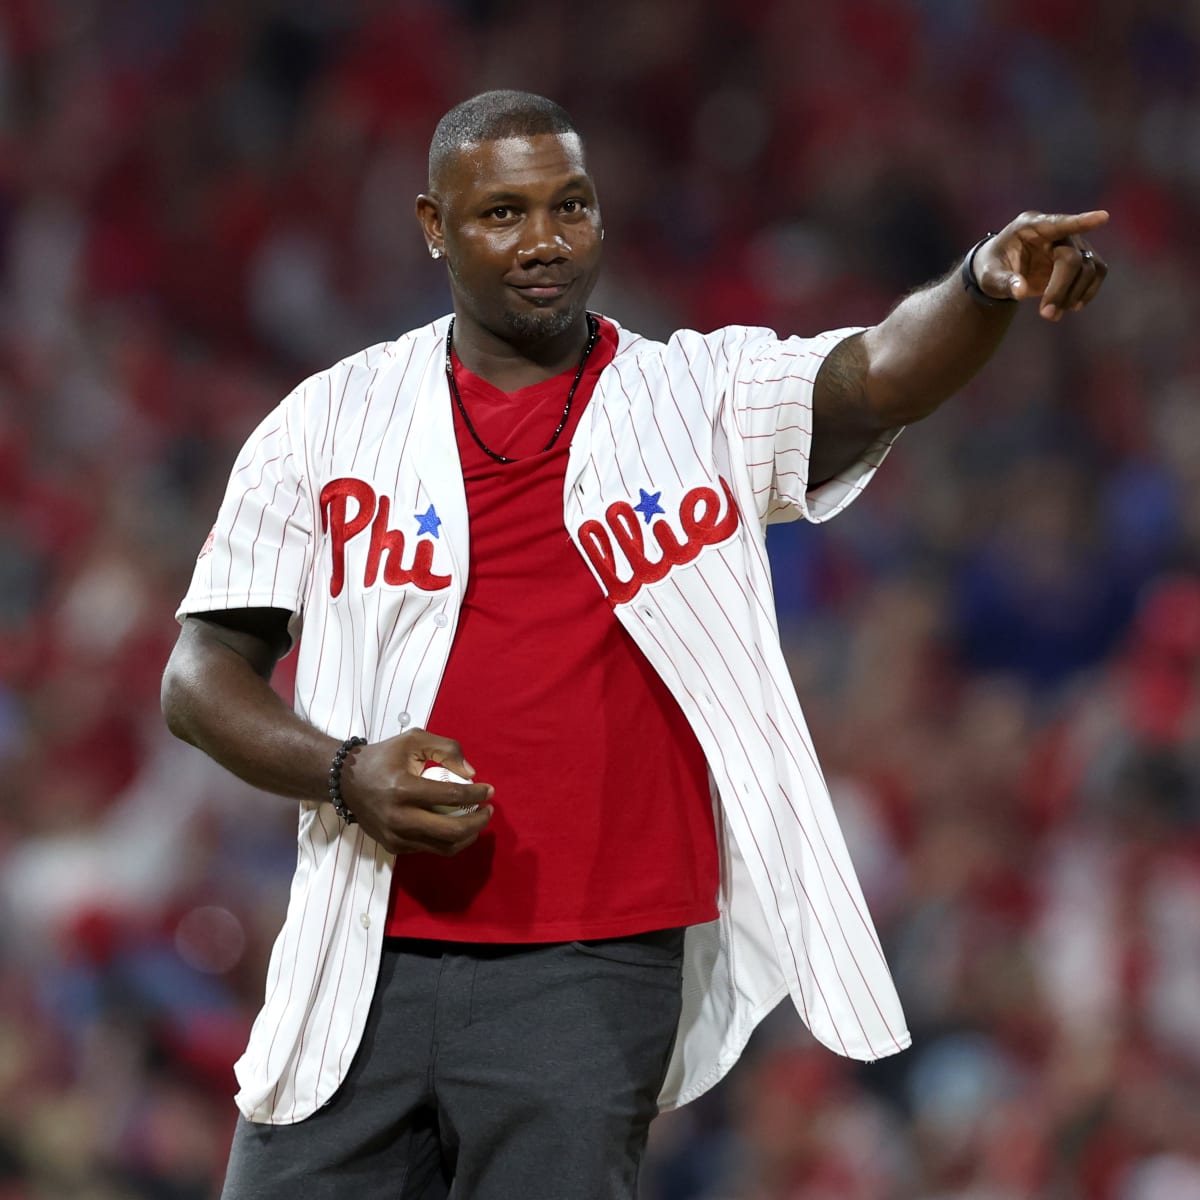 Flimsy number retirement policy shouldn't preclude Phillies from honoring Ryan  Howard  Phillies Nation - Your source for Philadelphia Phillies news,  opinion, history, rumors, events, and other fun stuff.